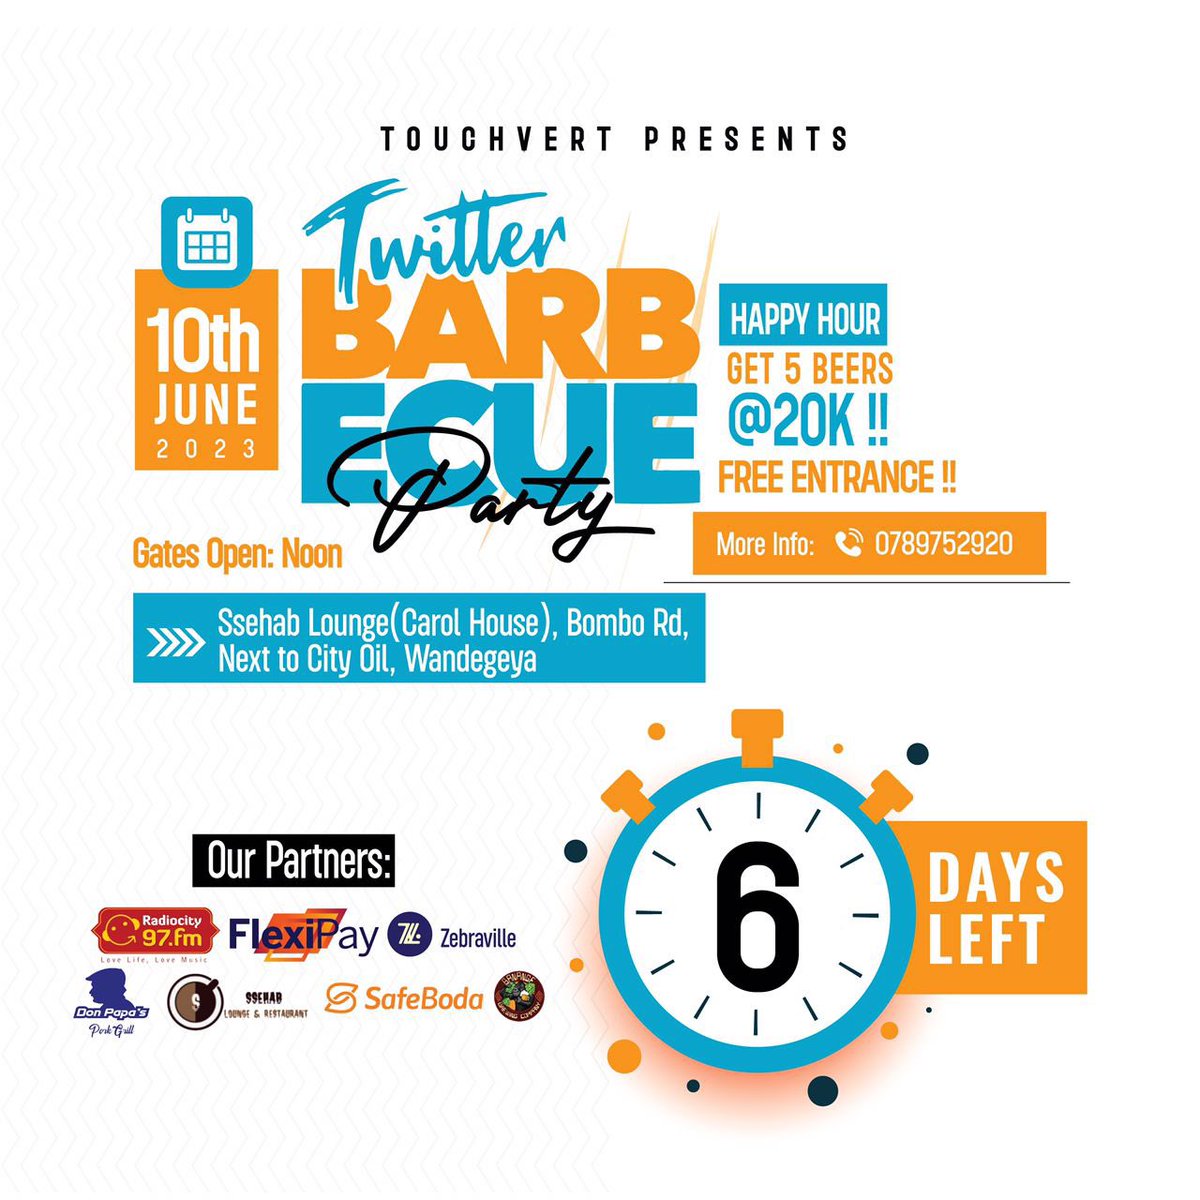 The #TwitterBarbecueParty is six days away. Please drop us some tweet. Will be much appreciated 🙏